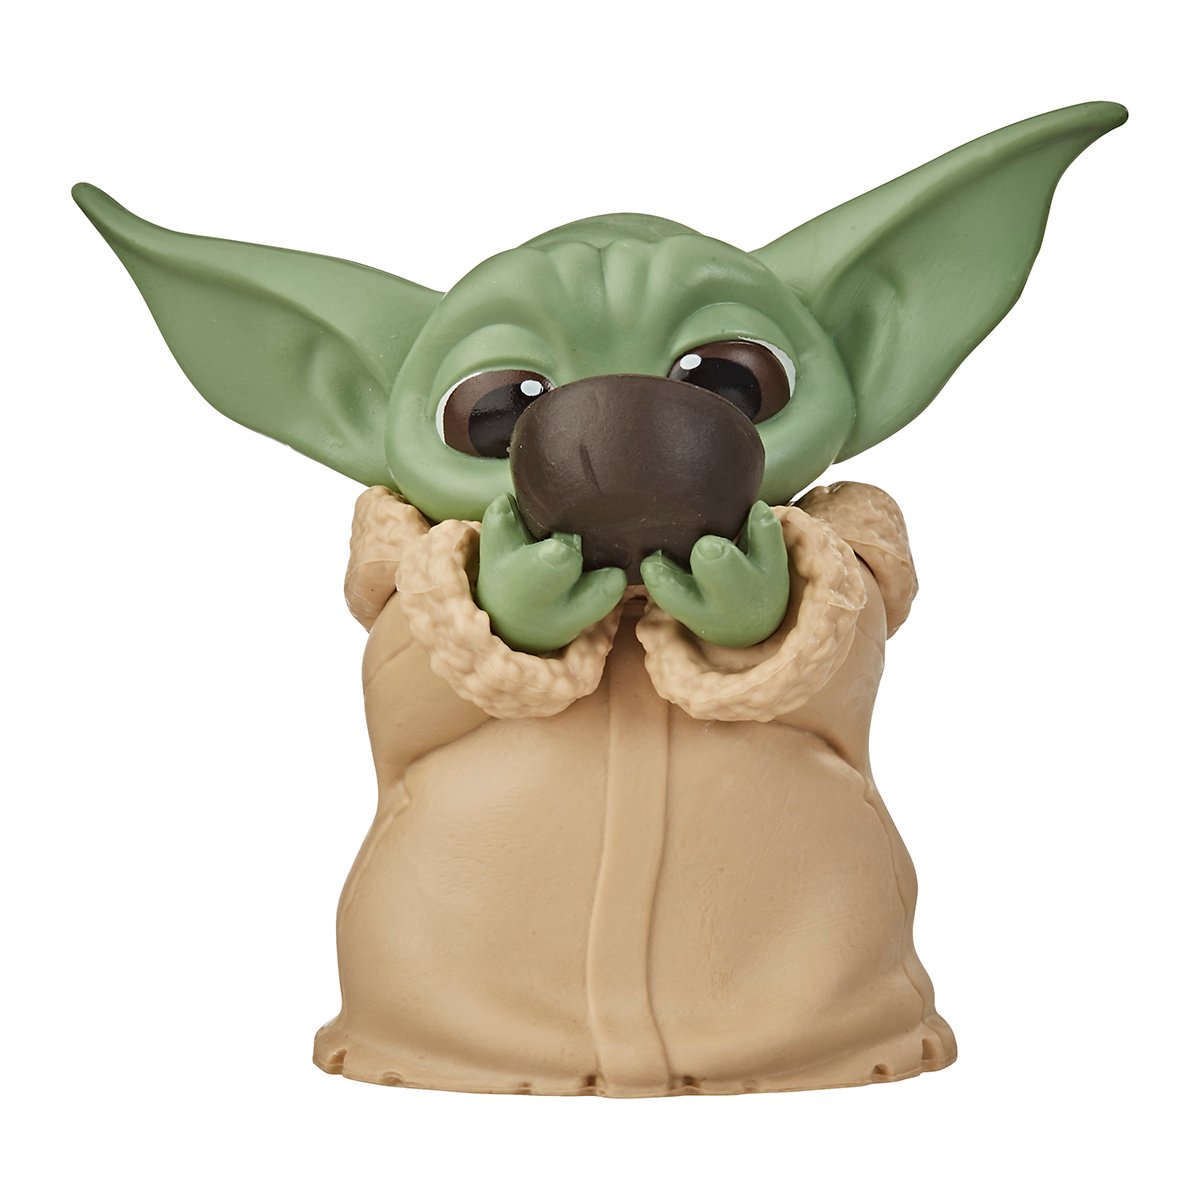 Figurina Star Wars Baby Yoda, Sipping Soup, F12185l00, 6 cm